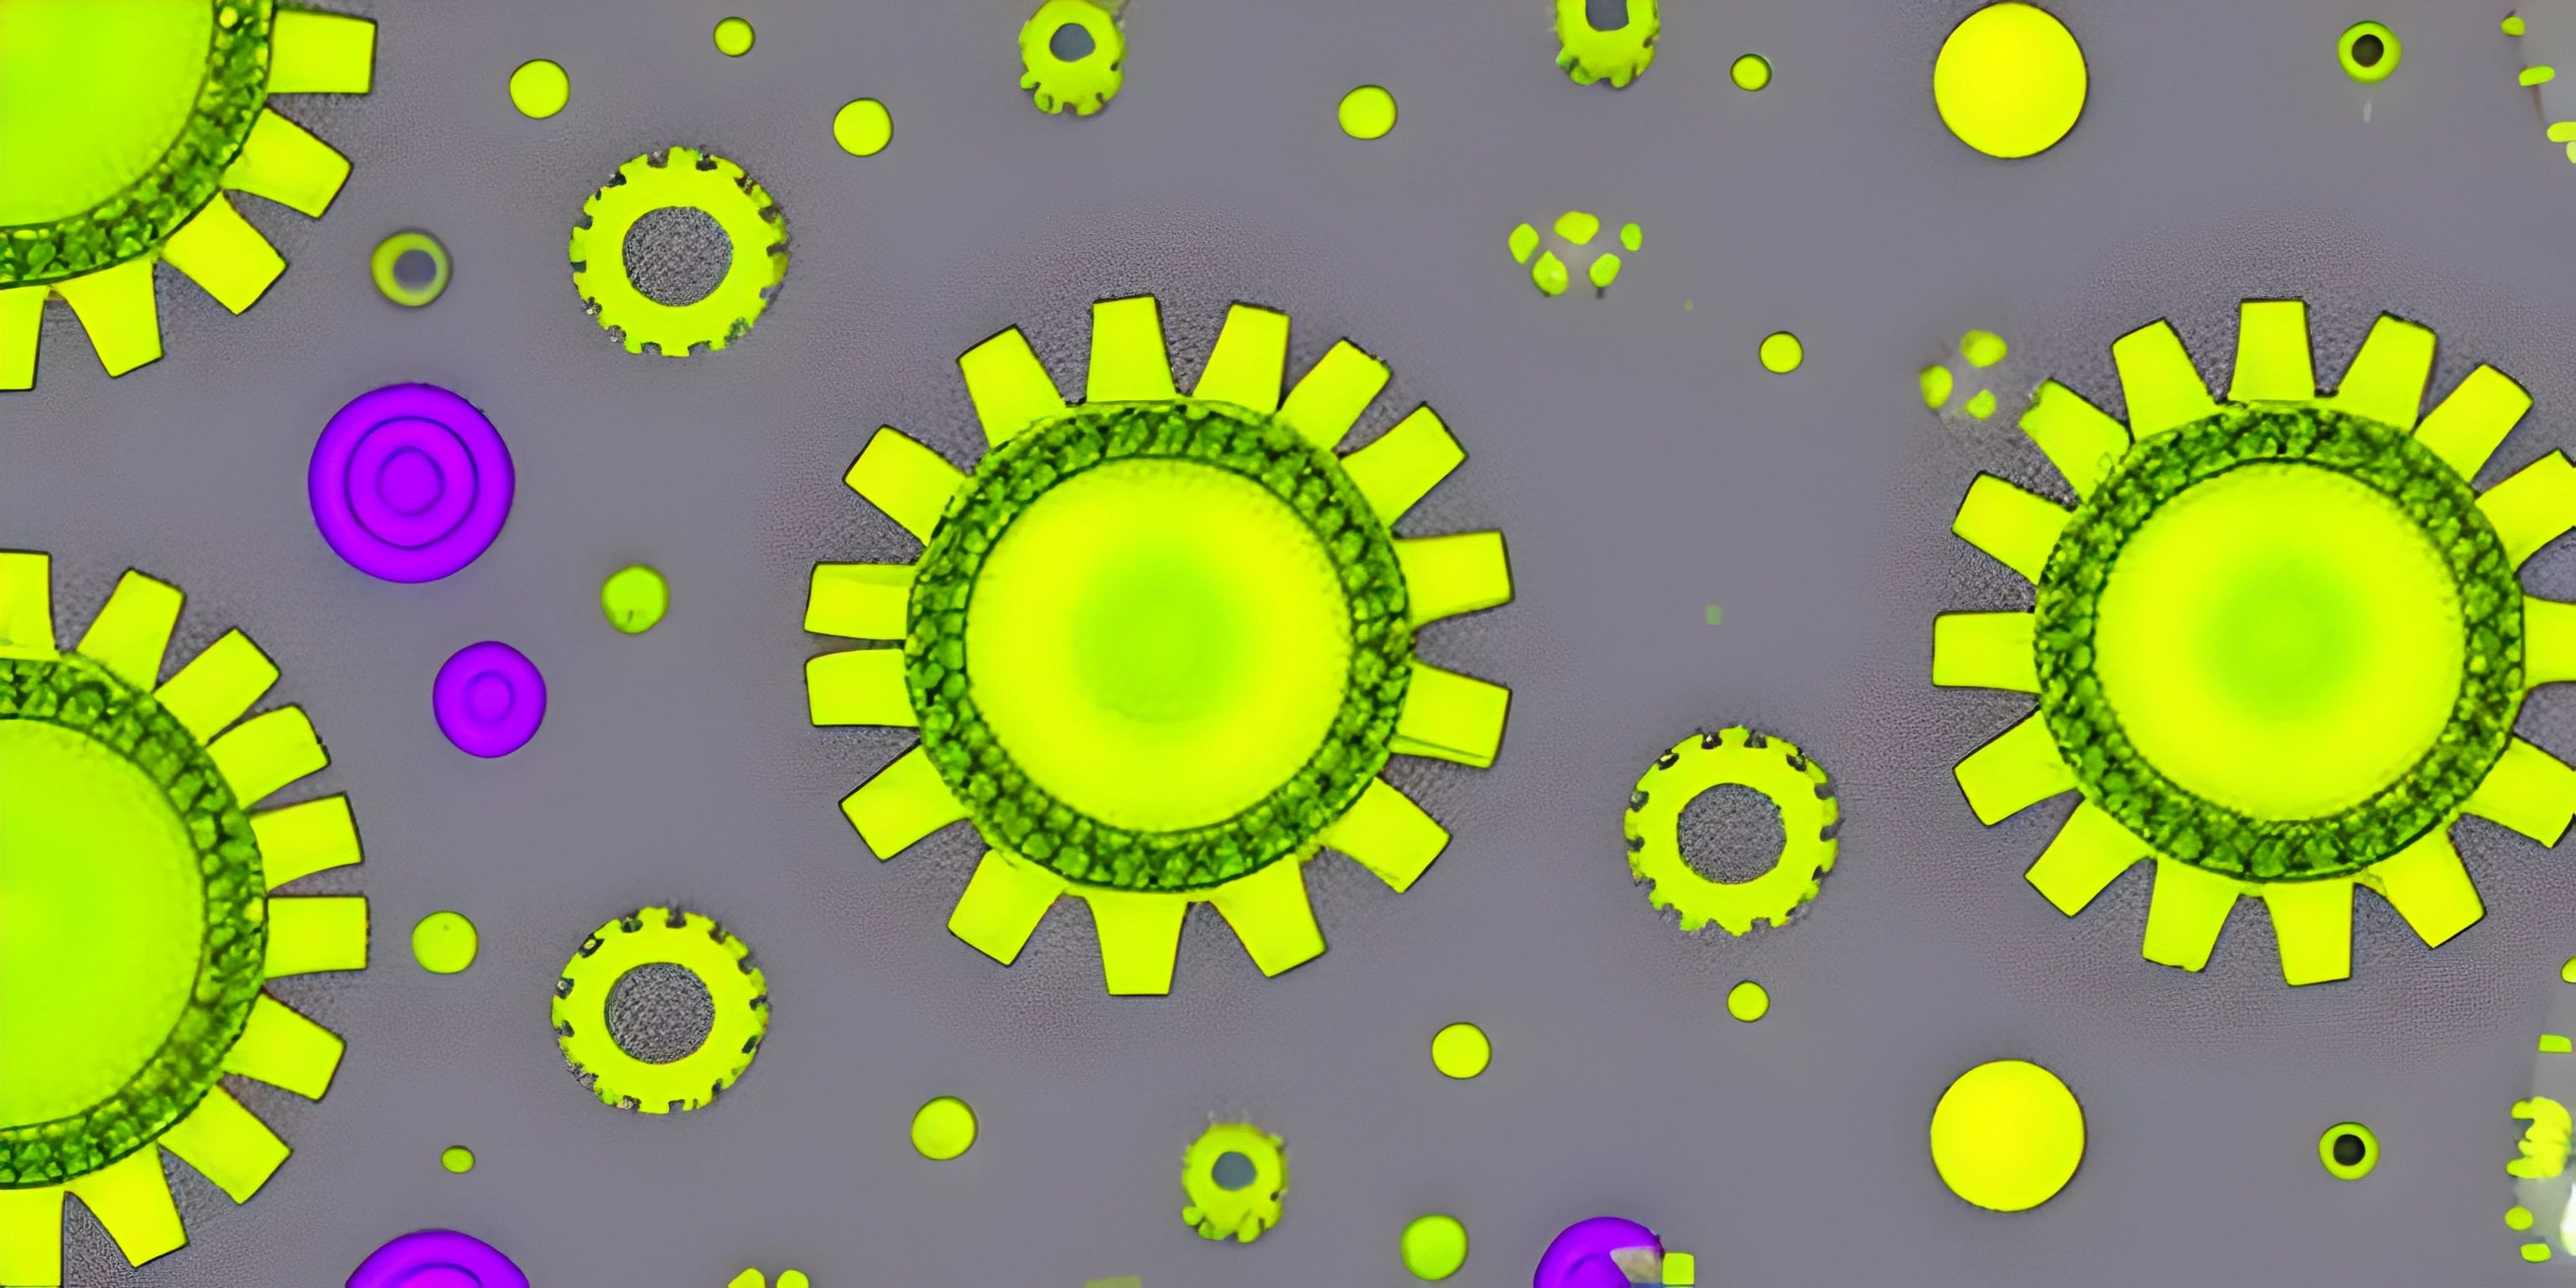 green and purple corona gears are seen with some circles around them in this seamless video